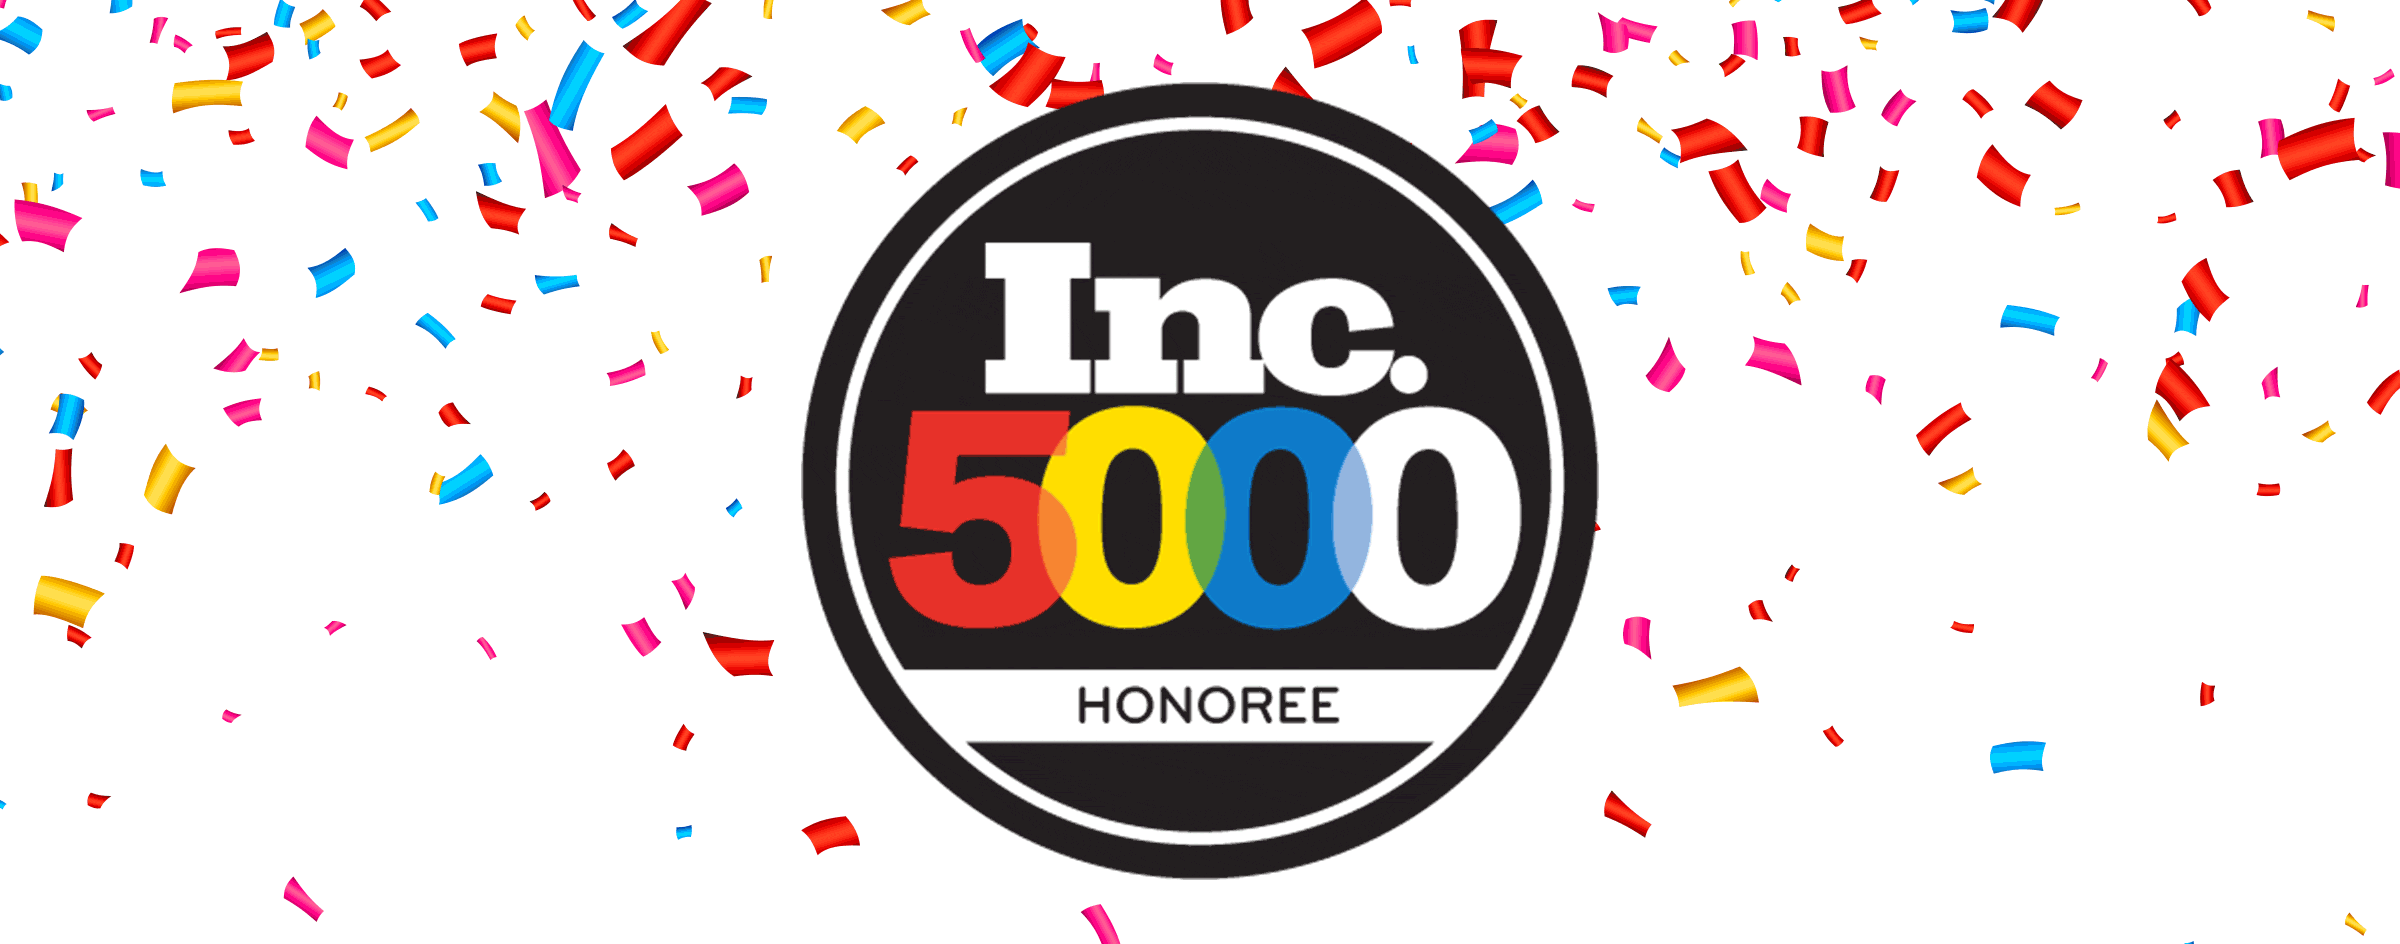 LoSasso Integrated Marketing earns a spot on Inc. 5000 list for 2018